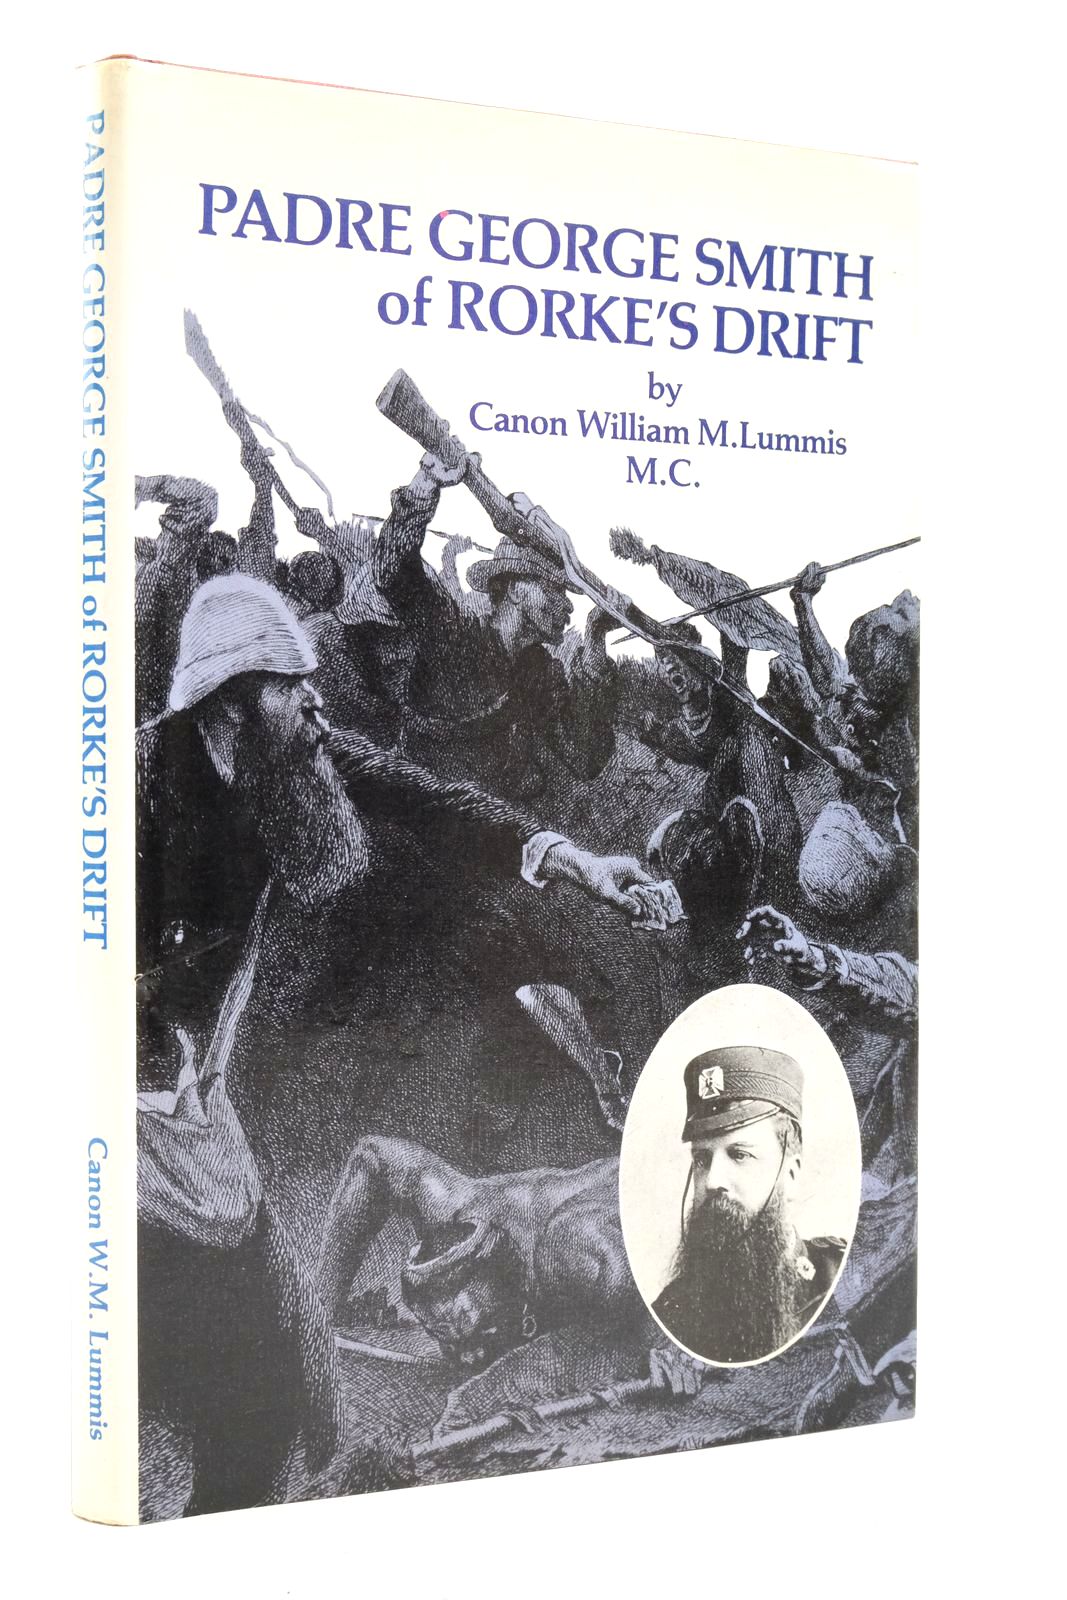 Photo of PADRE GEORGE SMITH OF RORKE'S DRIFT written by Lummis, William Murrell published by Canon William M. Lummis (STOCK CODE: 2138046)  for sale by Stella & Rose's Books